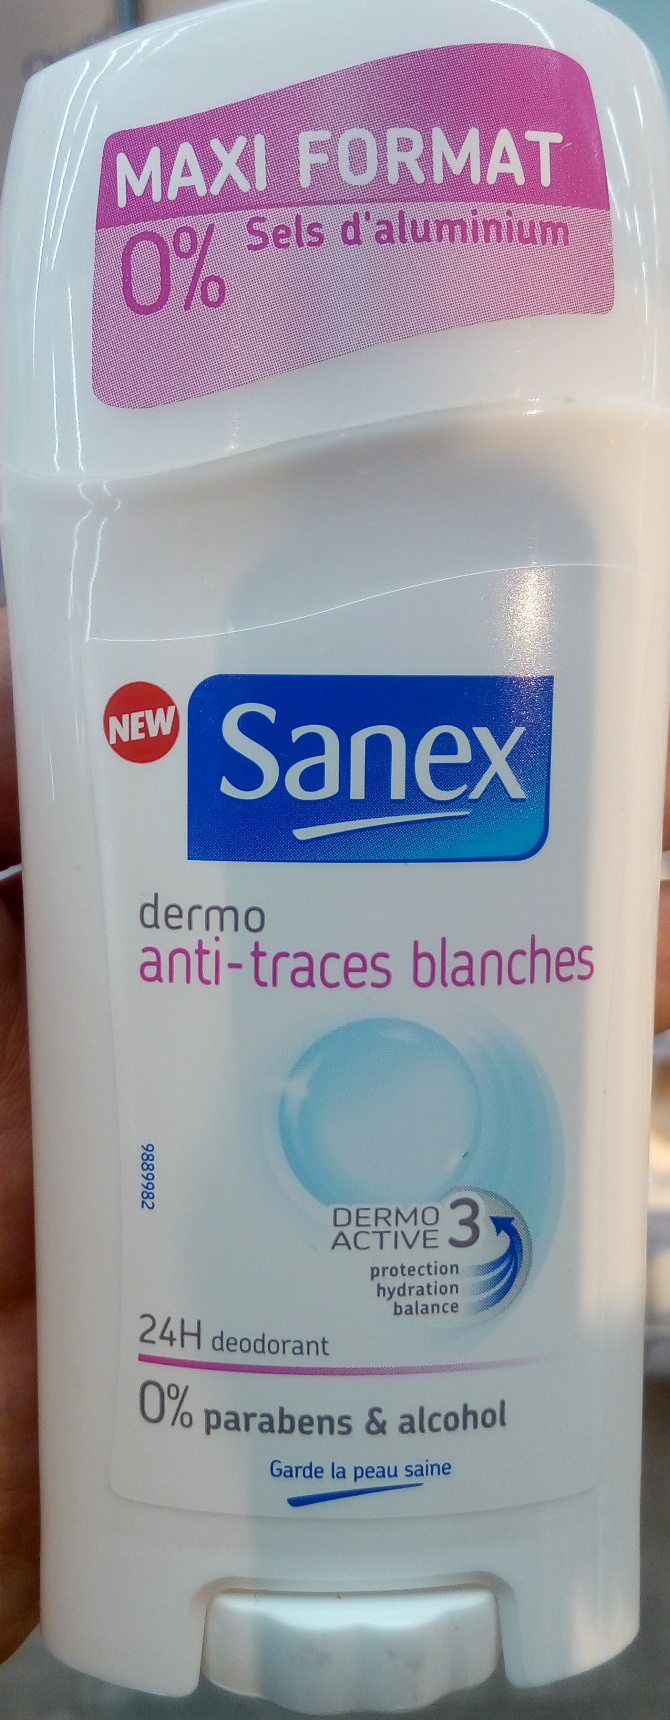 Dermo anti-traces blanches - Product - fr